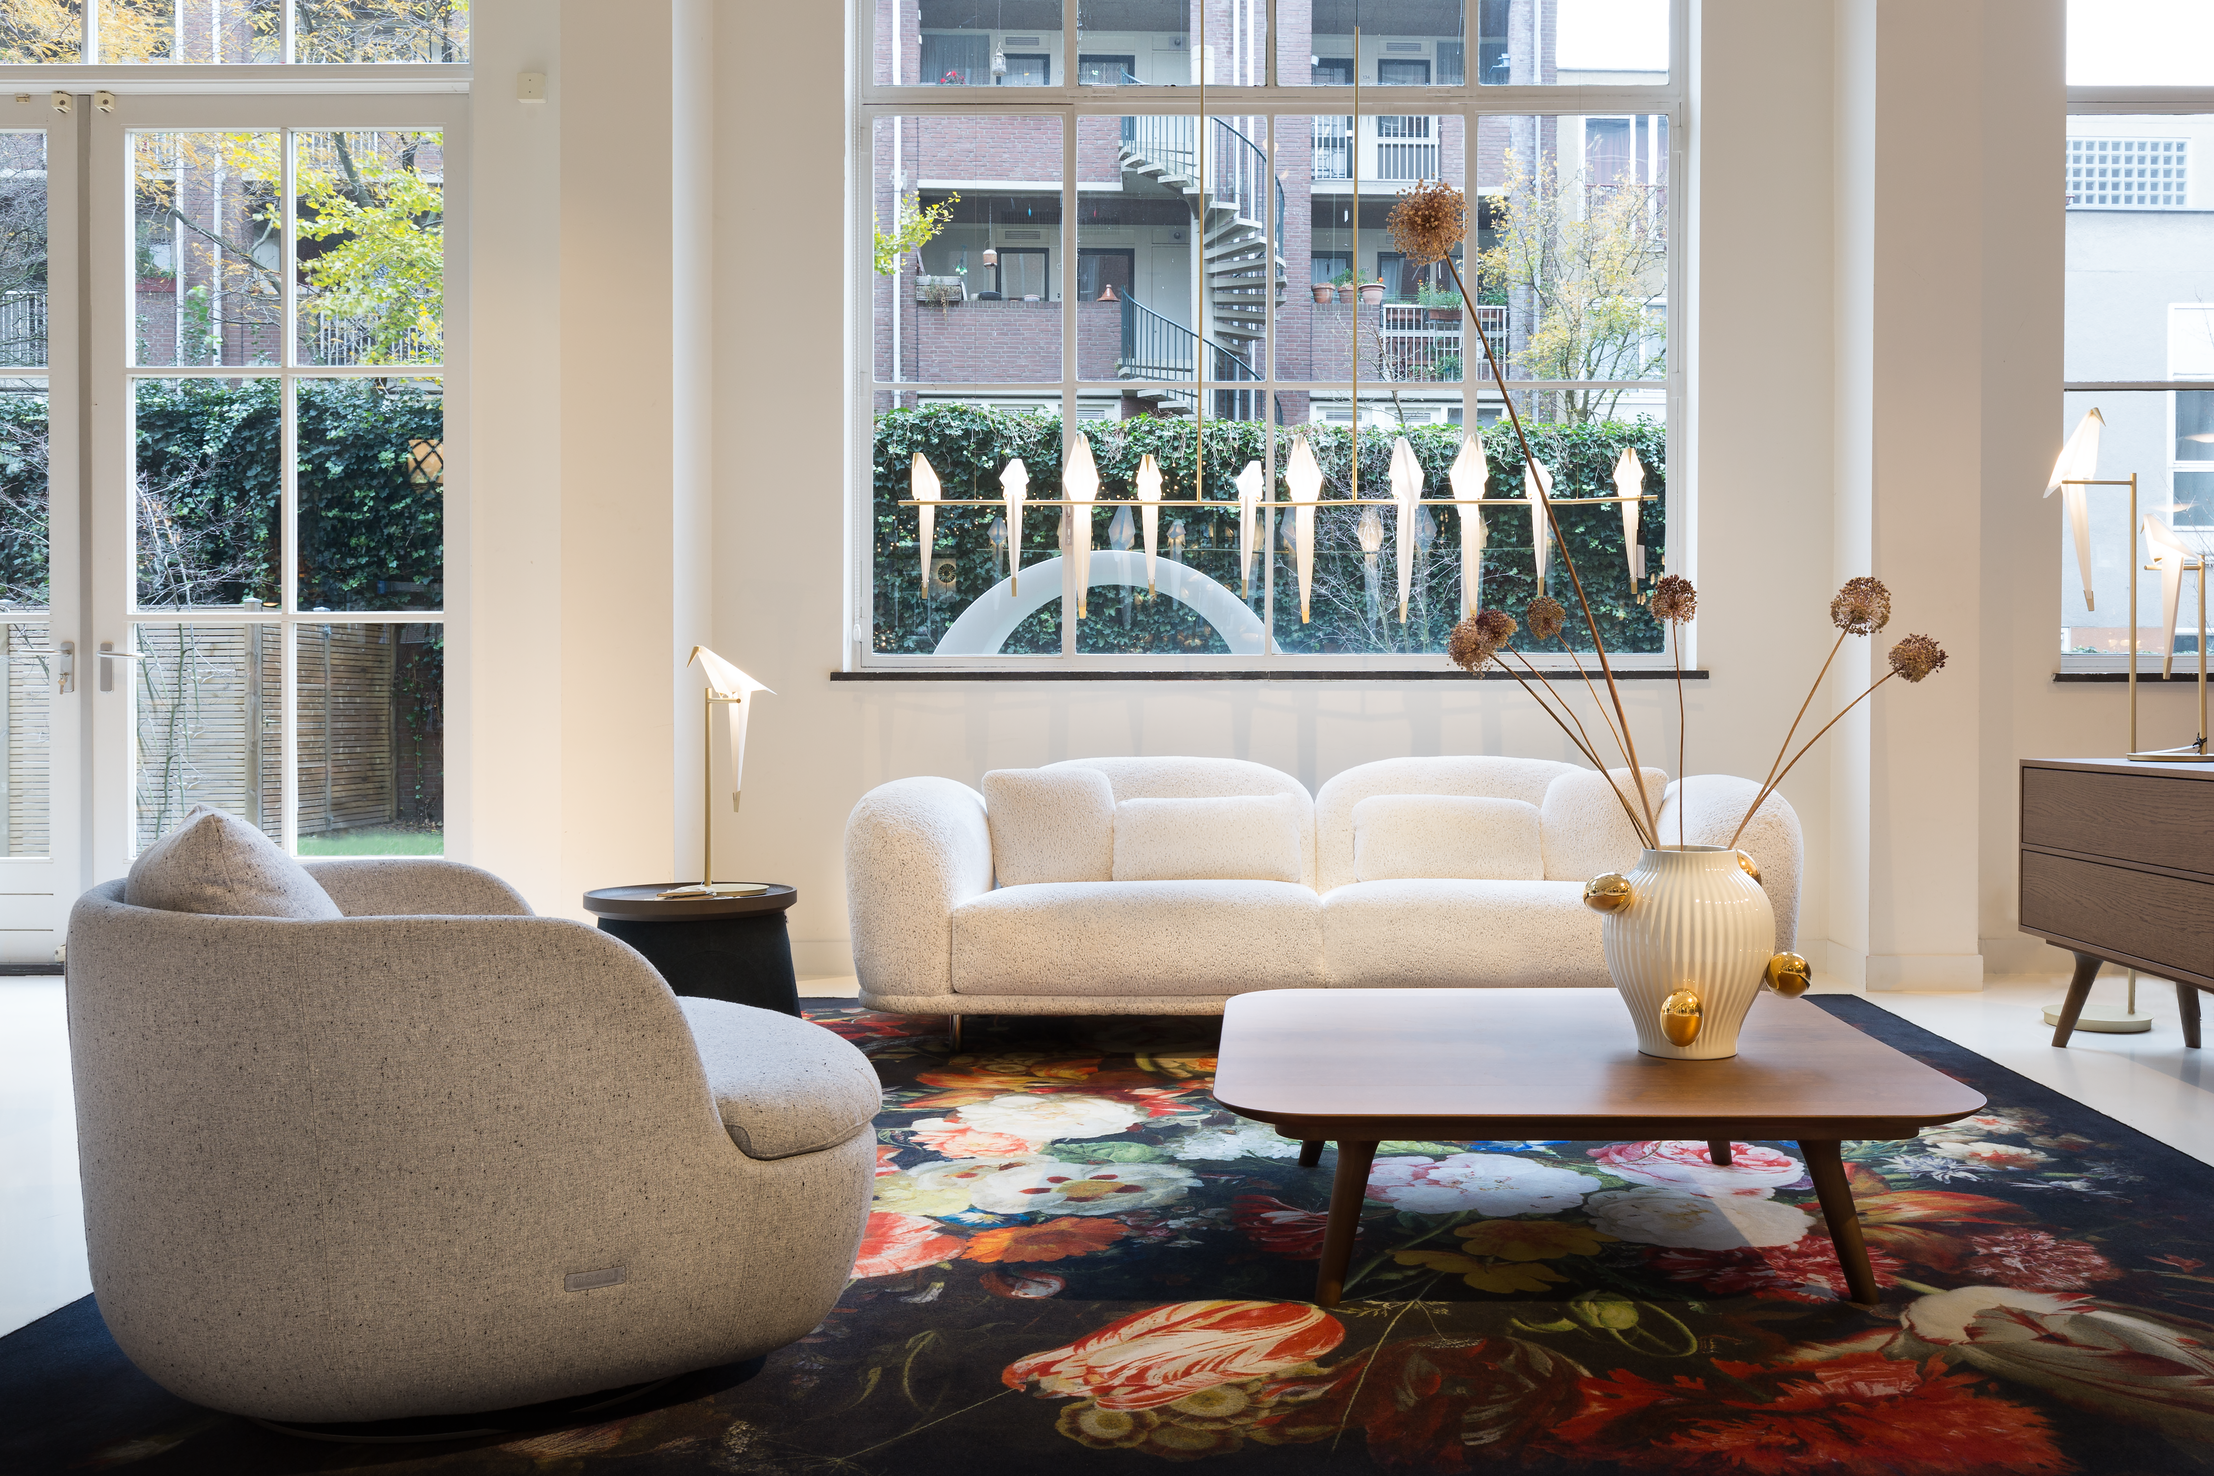 Amsterdam showroom setting with Zio Coffee Table, Bart Sofa and Perch lamps